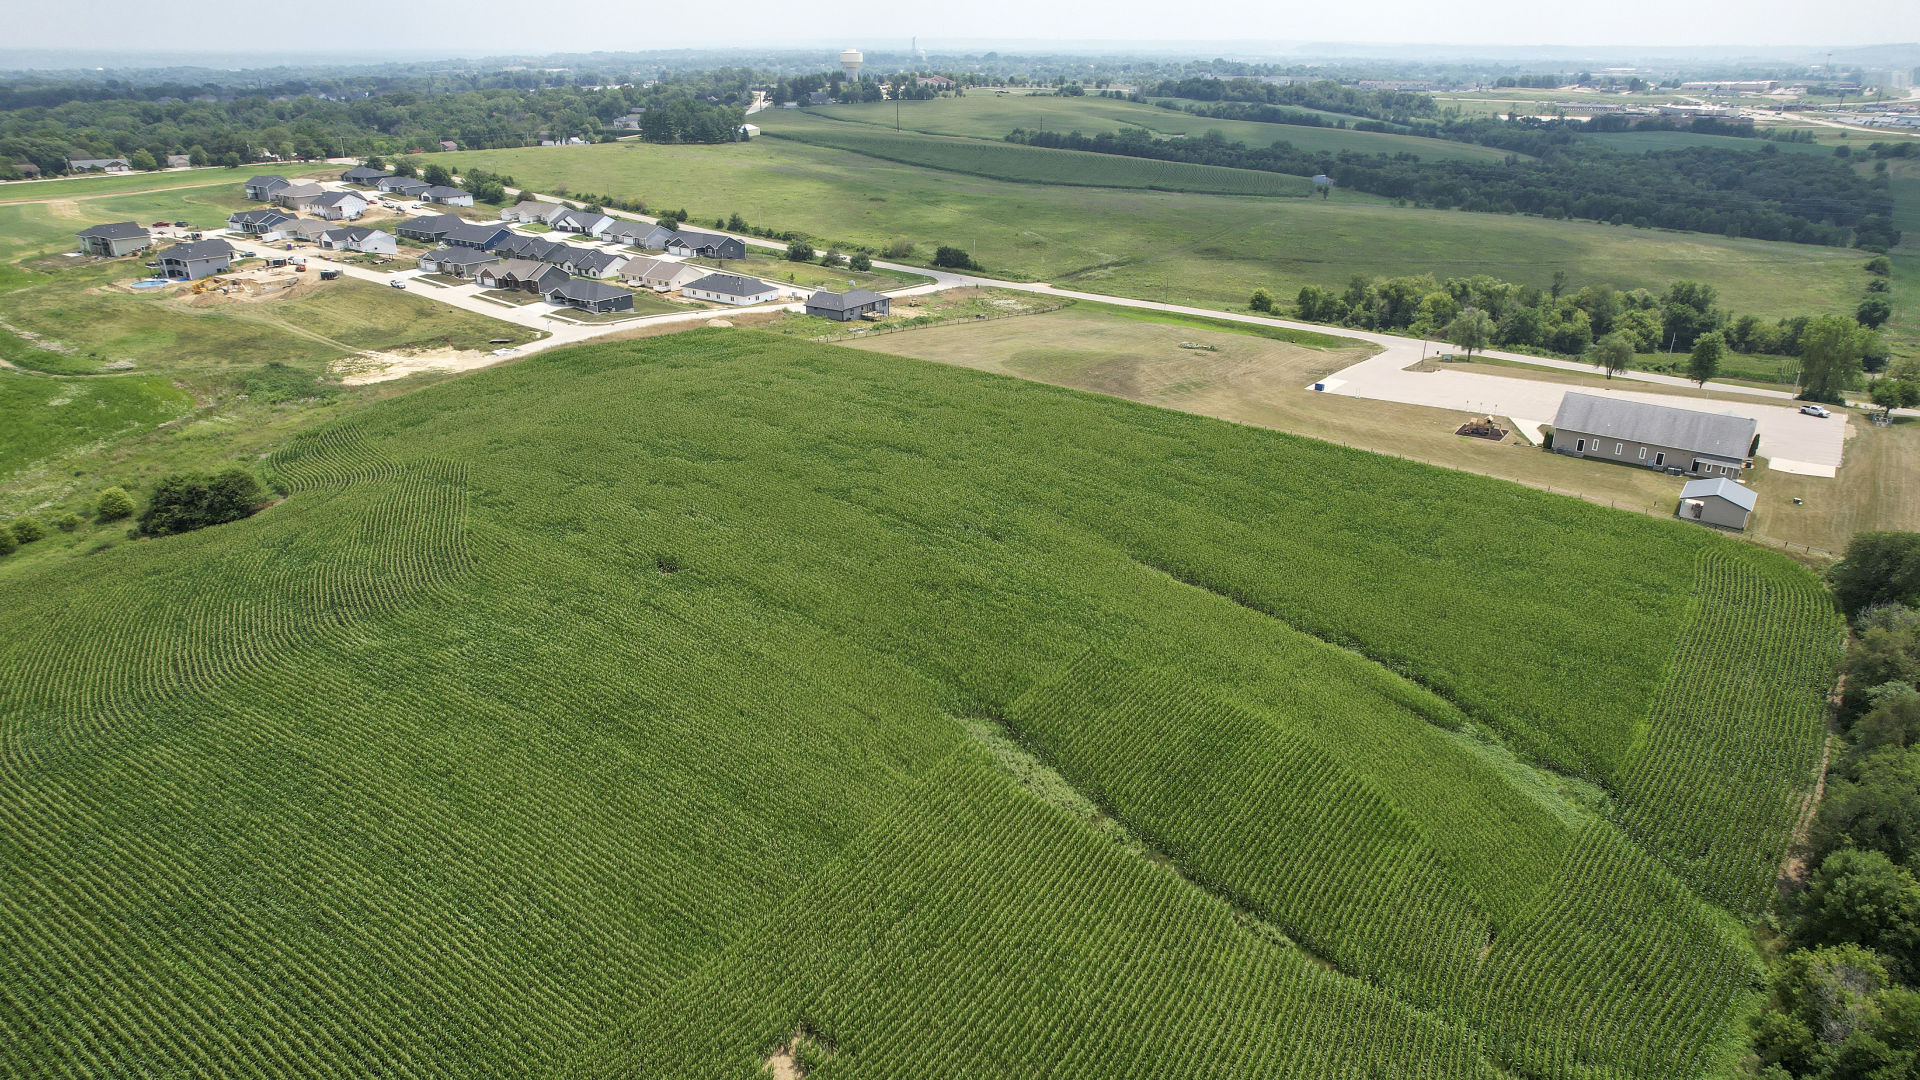 What is now a cornfield north of Derby Grange Road in Dubuque is the proposed location for The Estates of Dubuque. PHOTO CREDIT: Dave Kettering